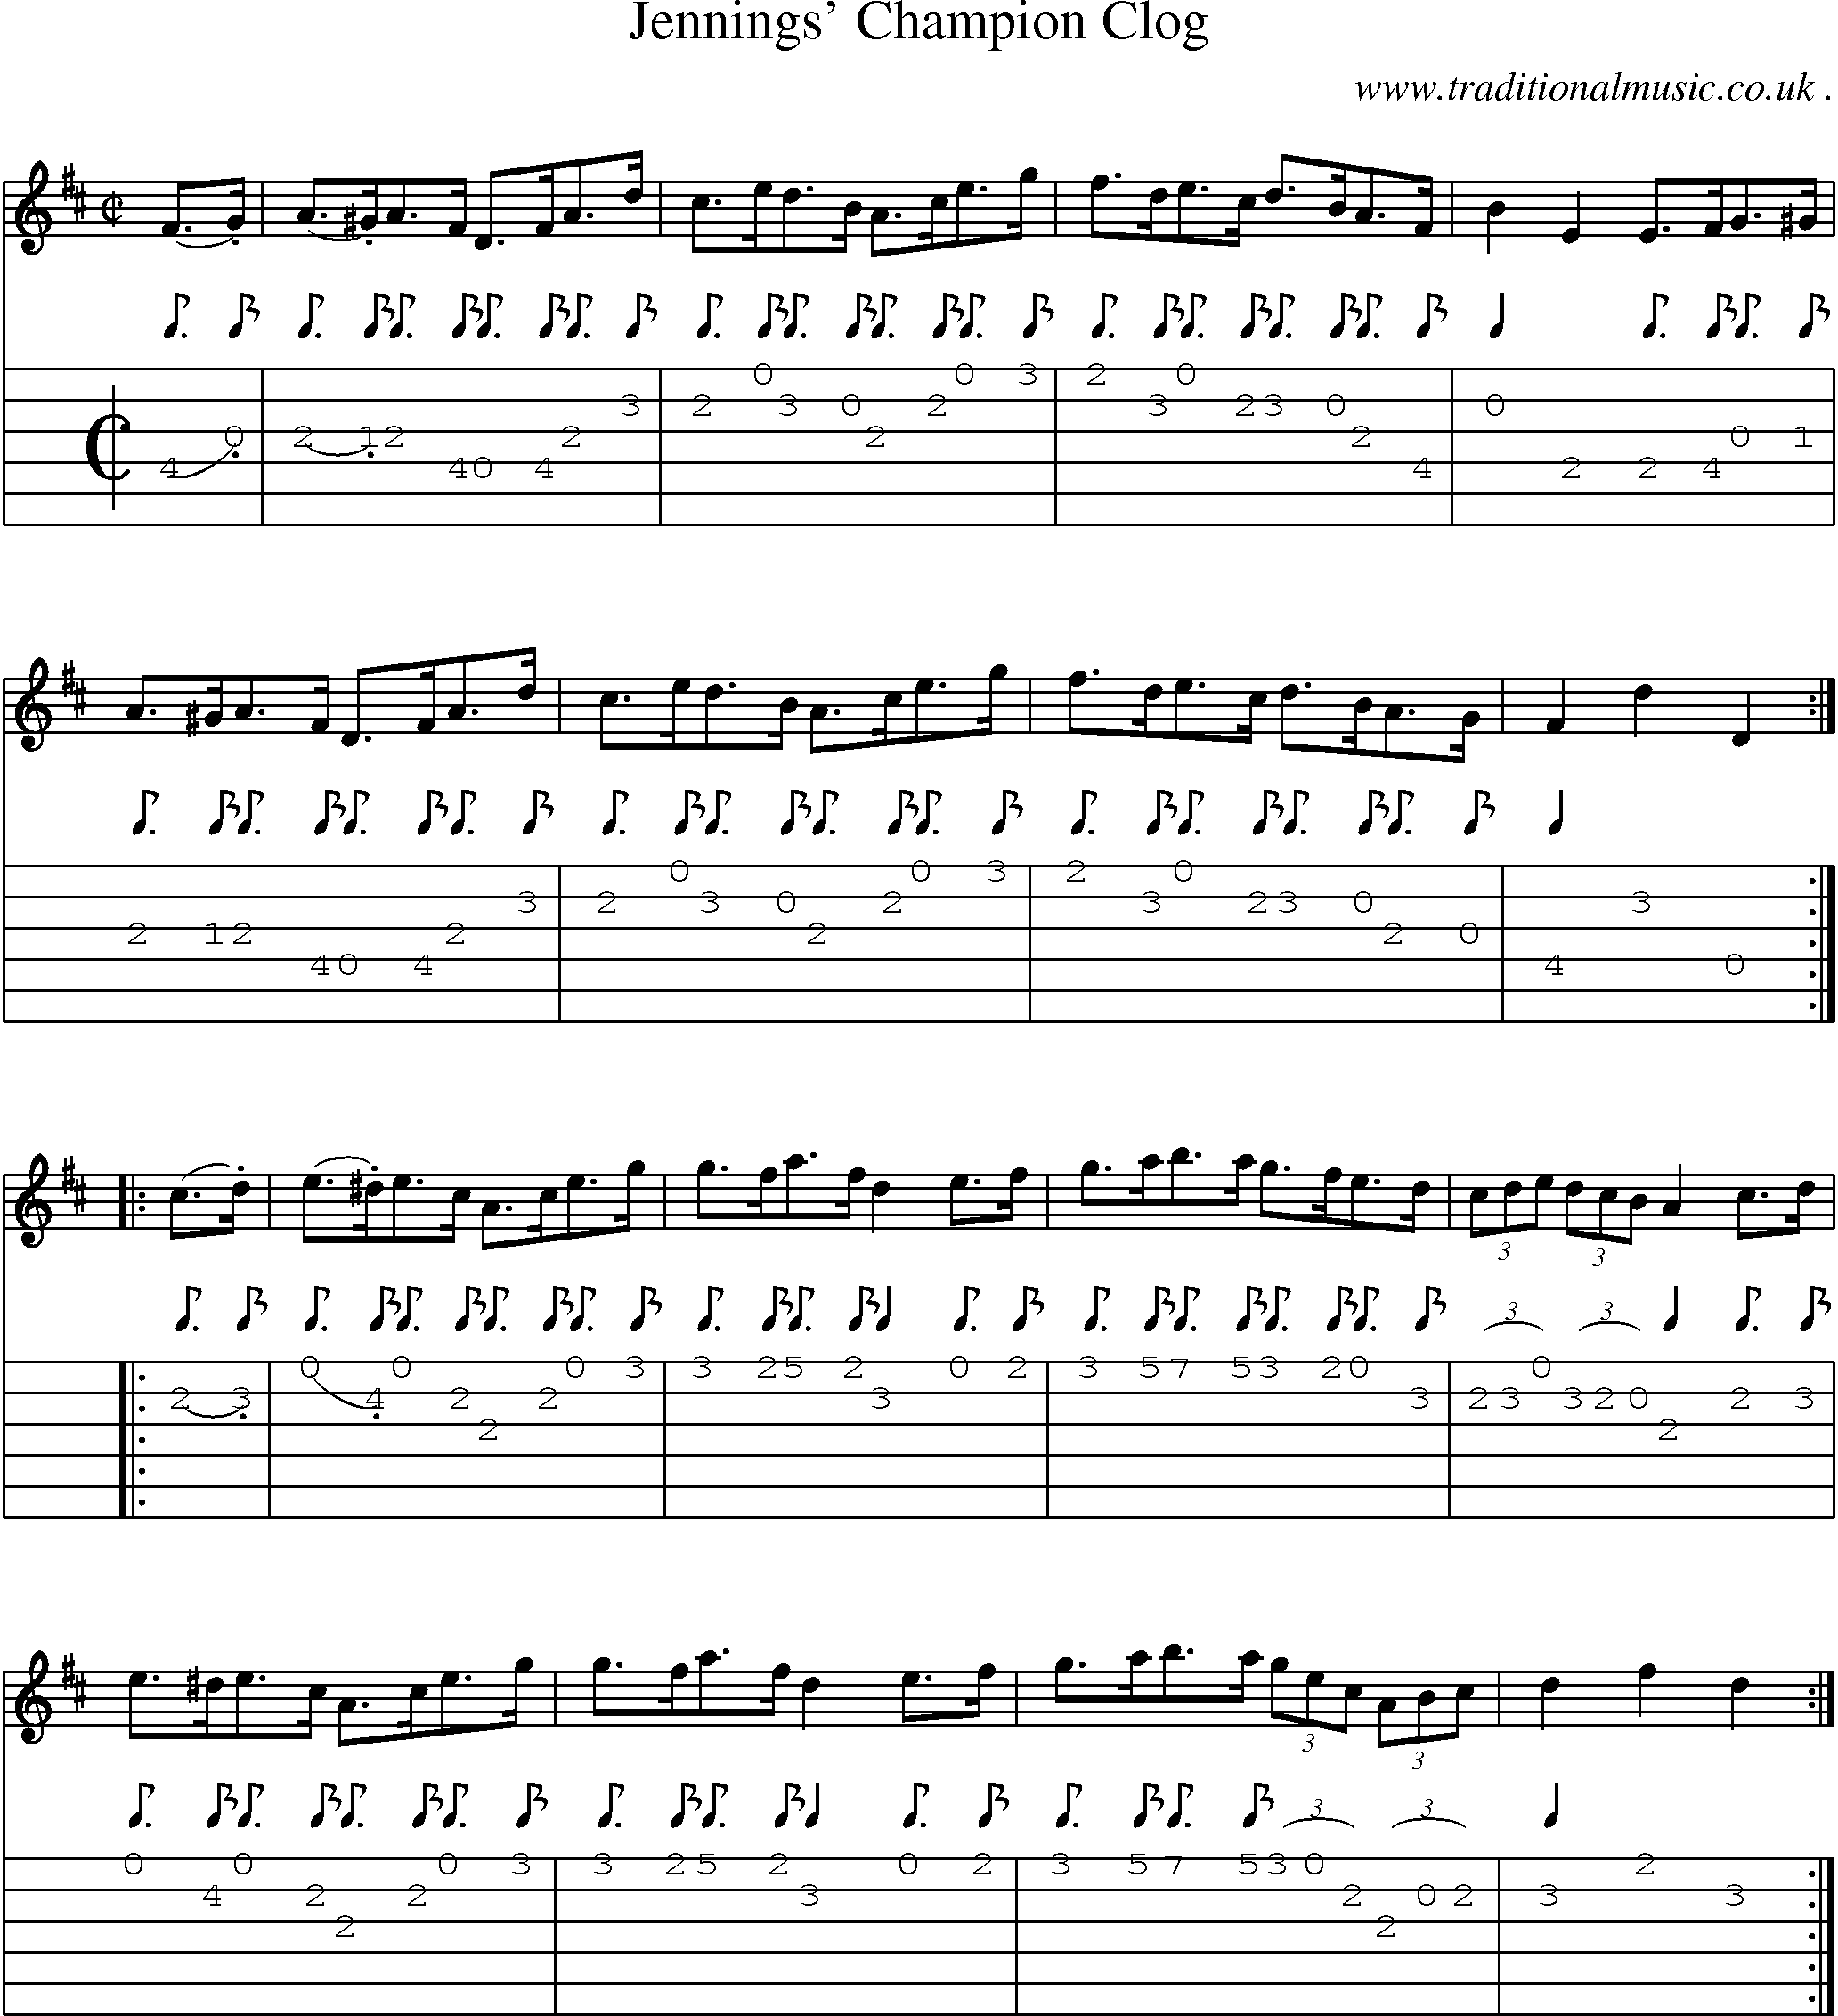 Sheet-Music and Guitar Tabs for Jennings Champion Clog